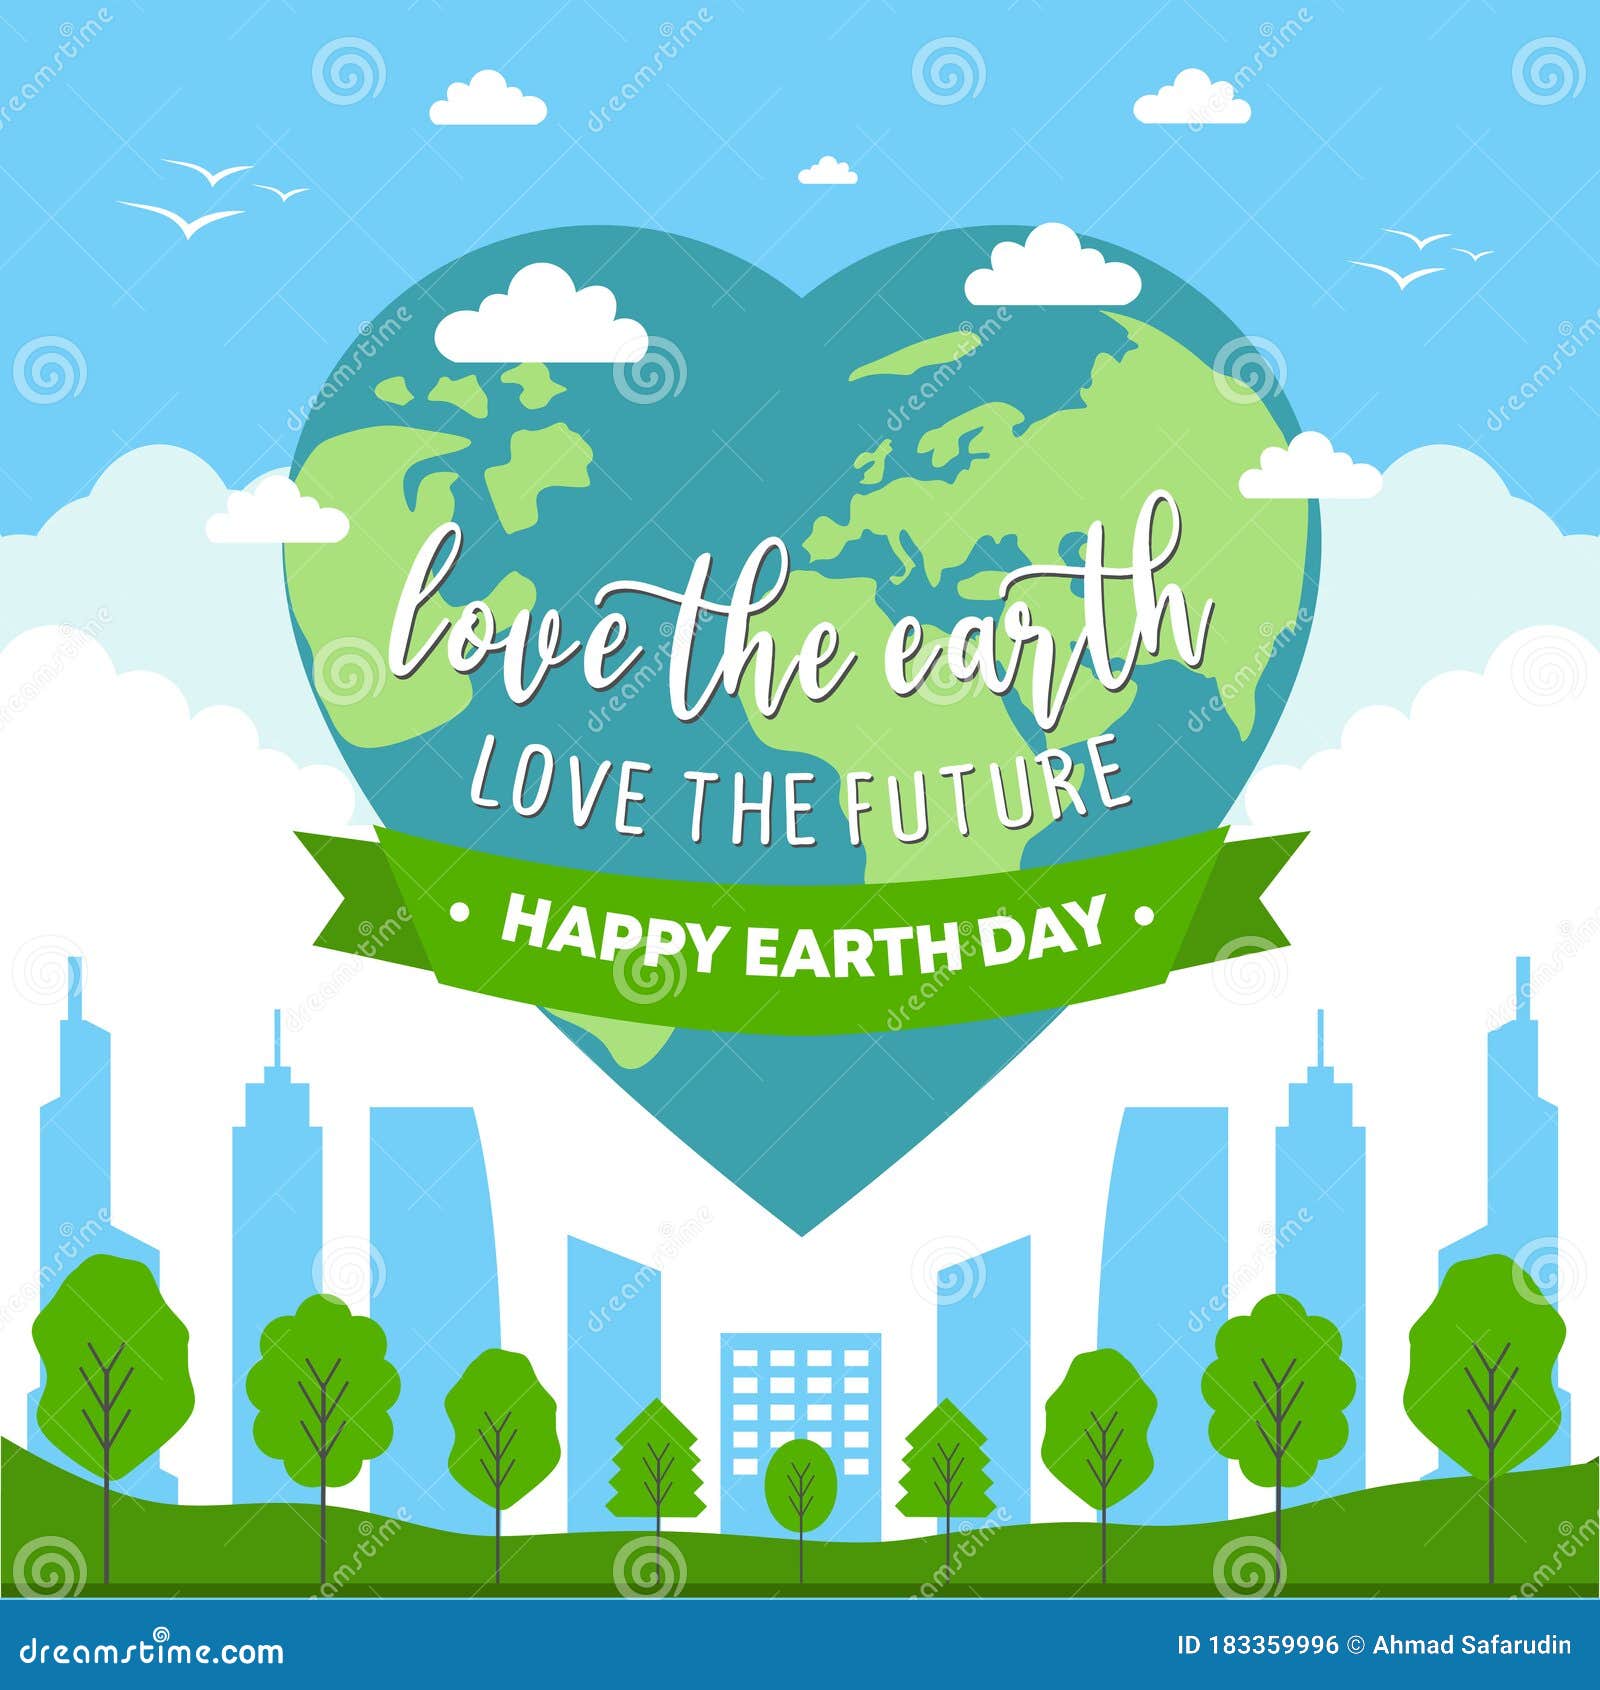 Happy Earth Day Celebration Design Environment And Ecology Theme Banner Poster And Background World Map Background Vector Stock Vector Illustration Of Business Holiday 183359996